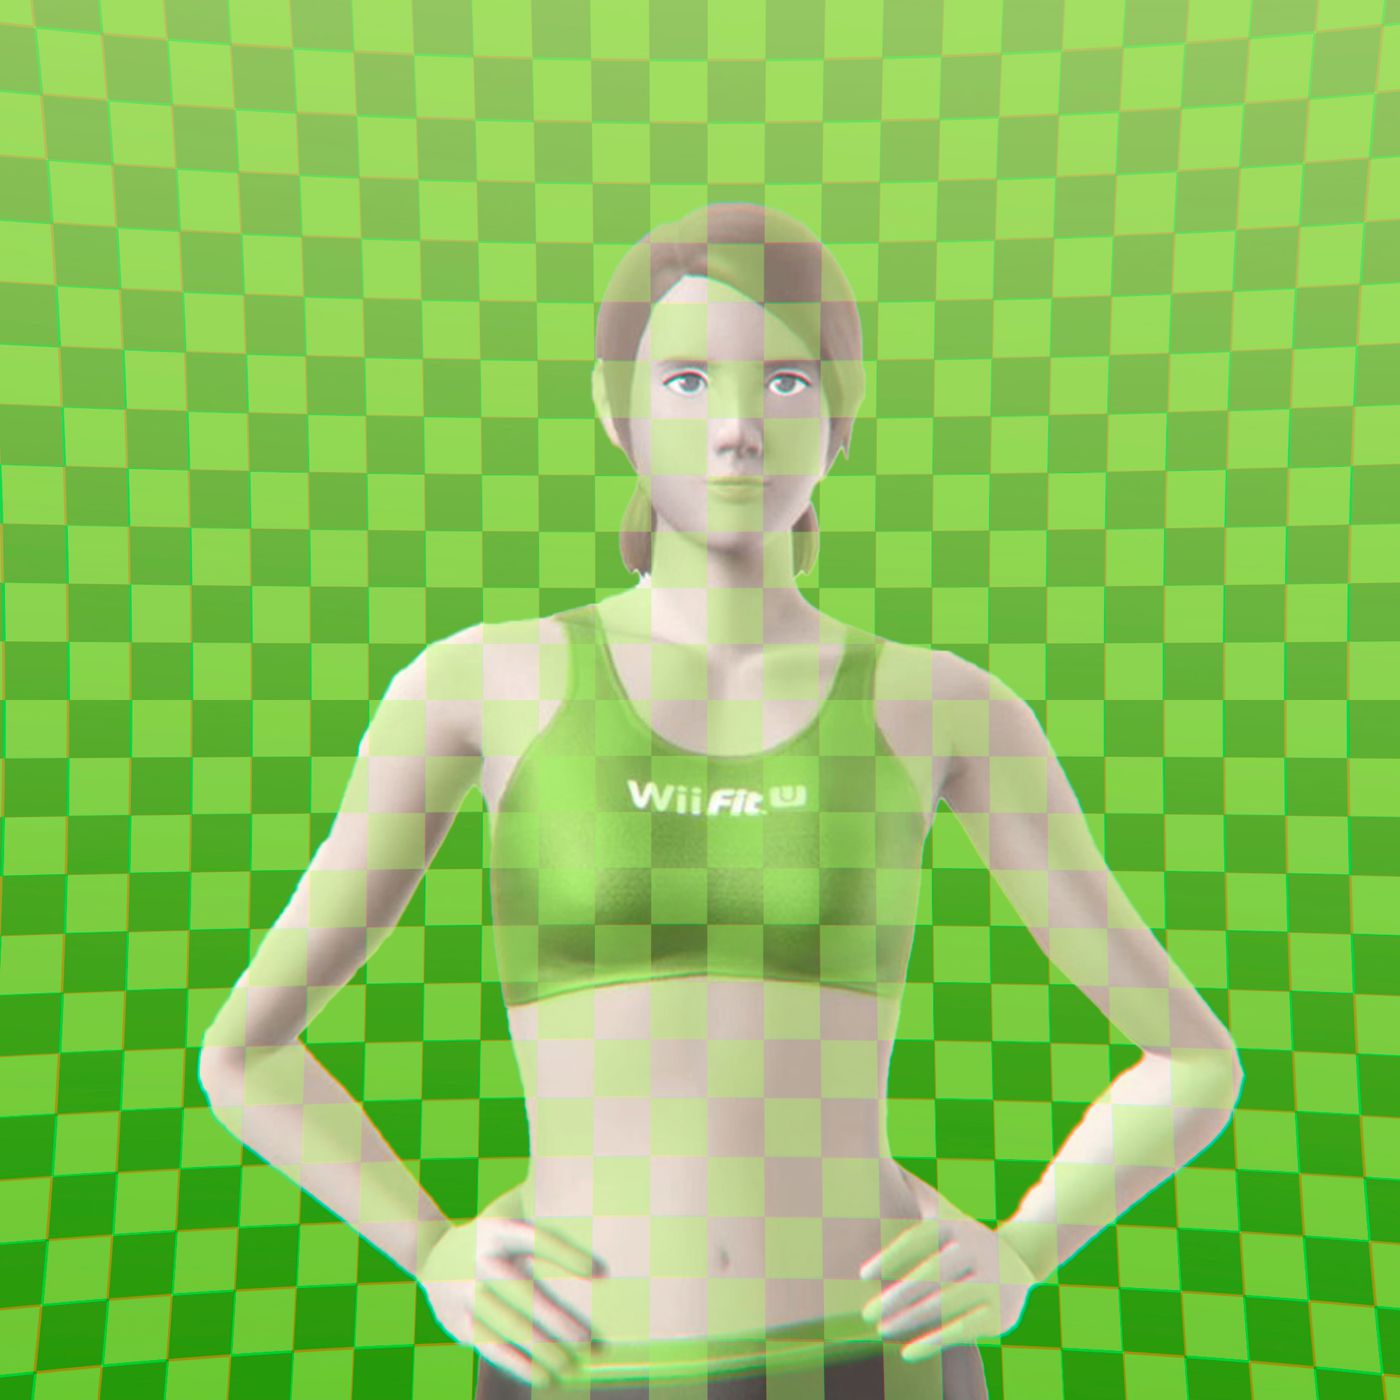 målbar automatisk Styrke Here's the lasting impact of Nintedo's Wii Fit - Polygon